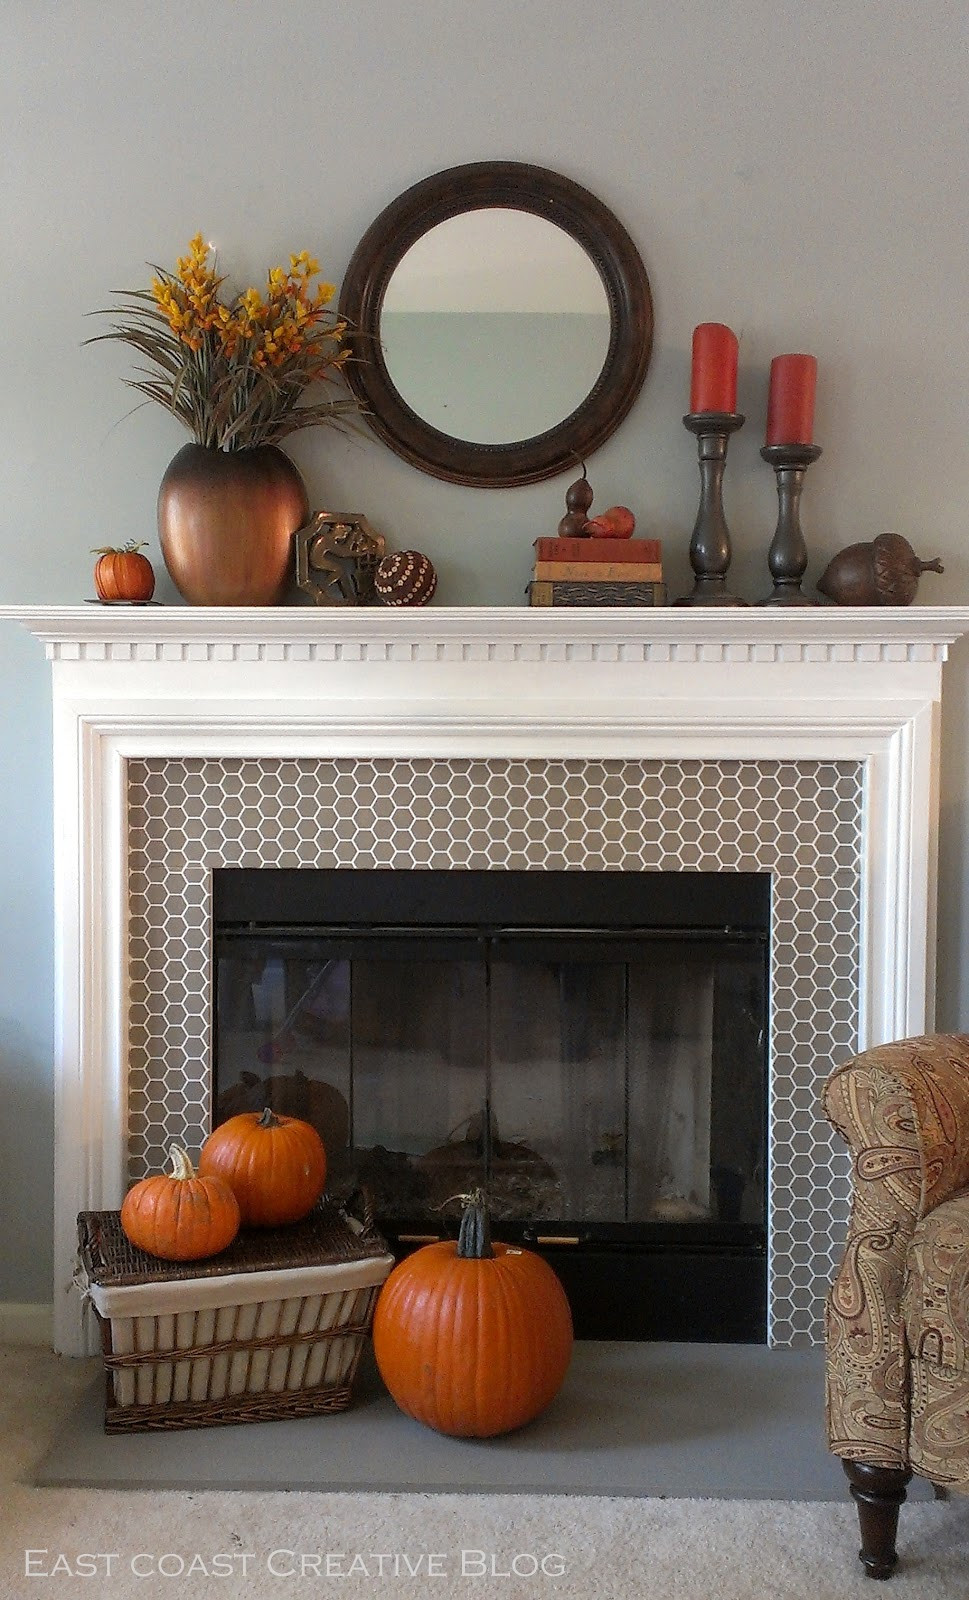 Fall Mantle Decorating Ideas
 A Fall Mantel 2 Ways Mantle